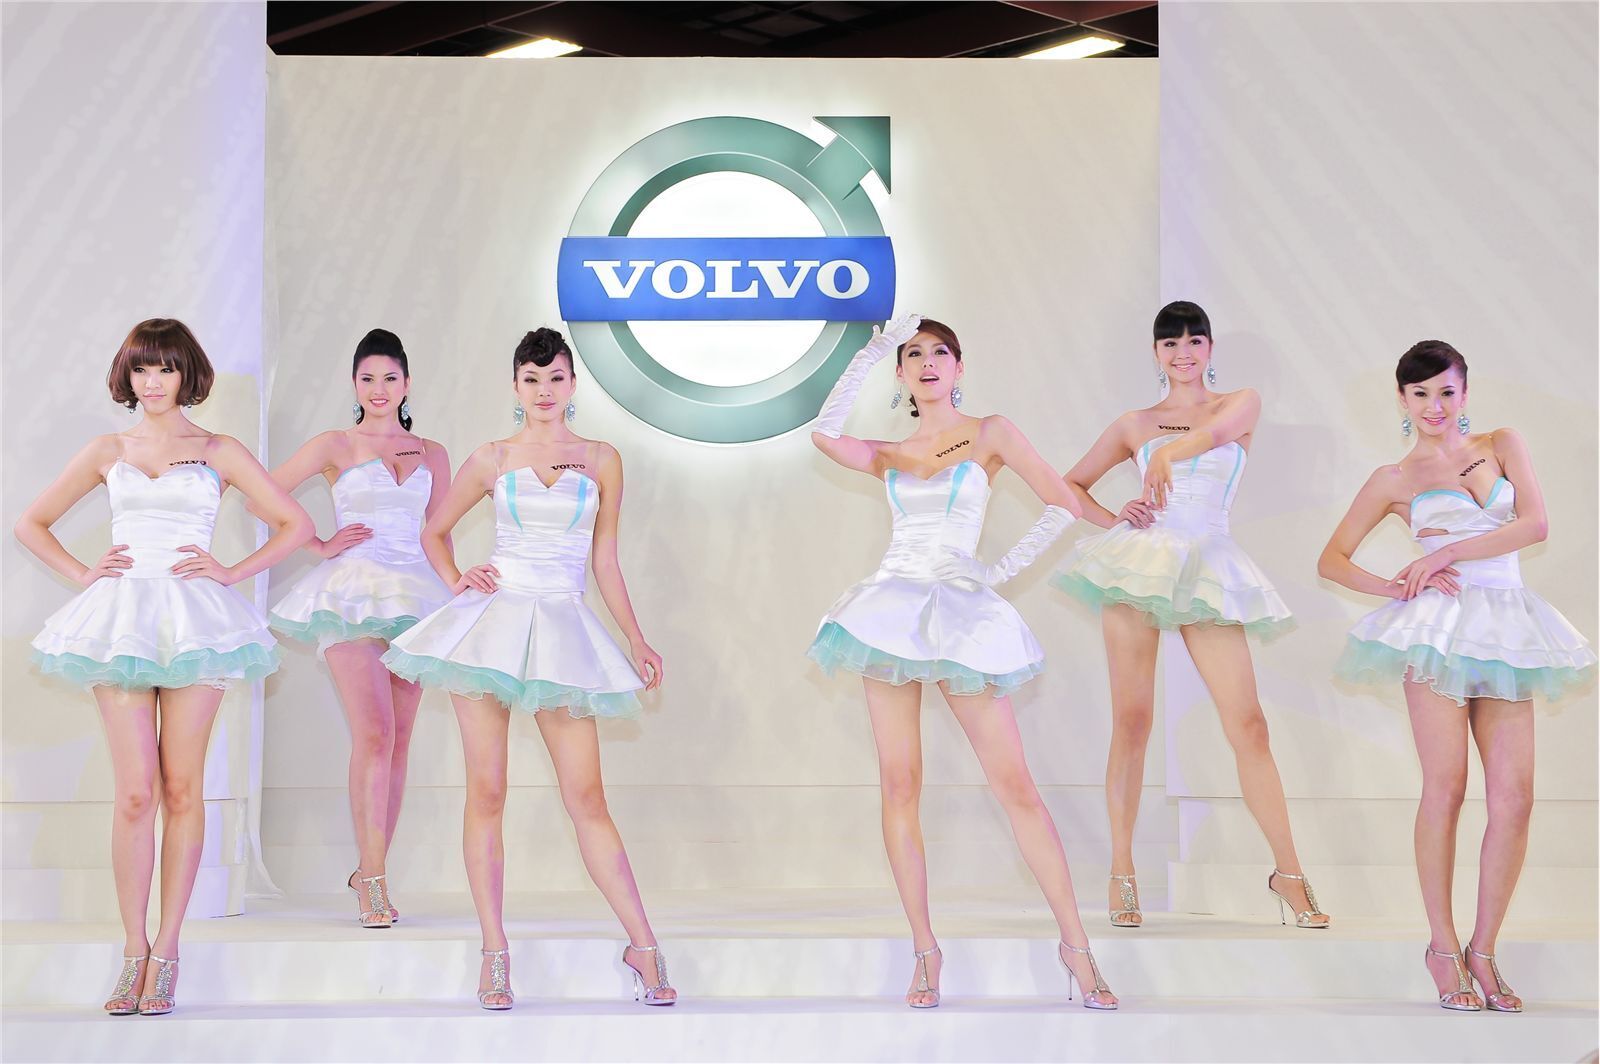 Top quality Volvo models at auto show